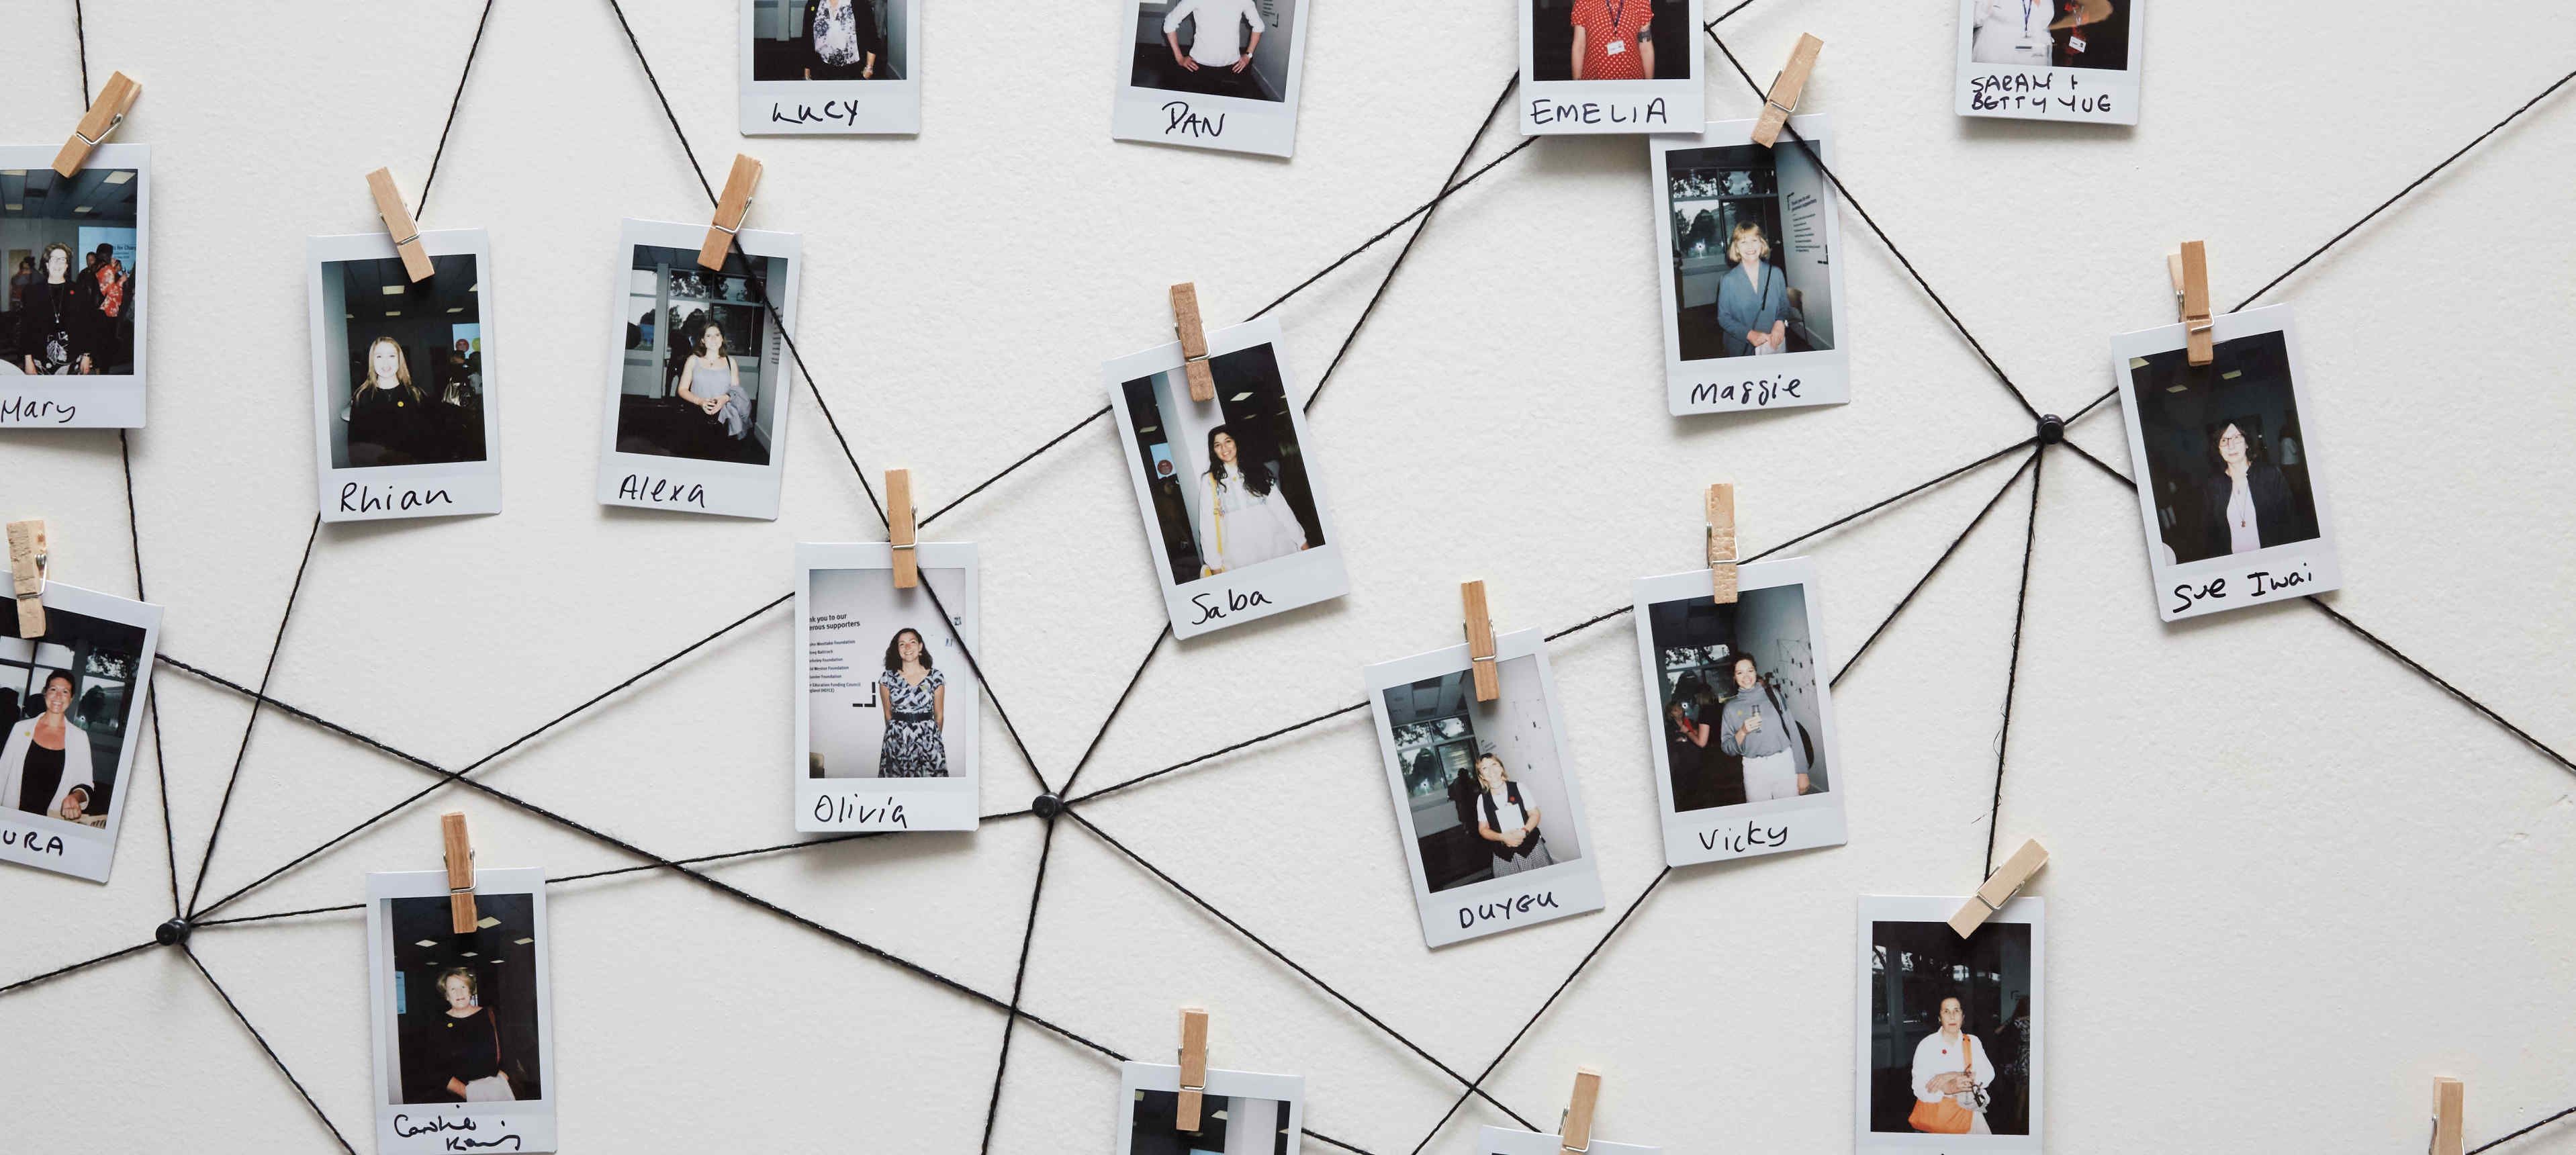 Network map for Agents of Change polaroids